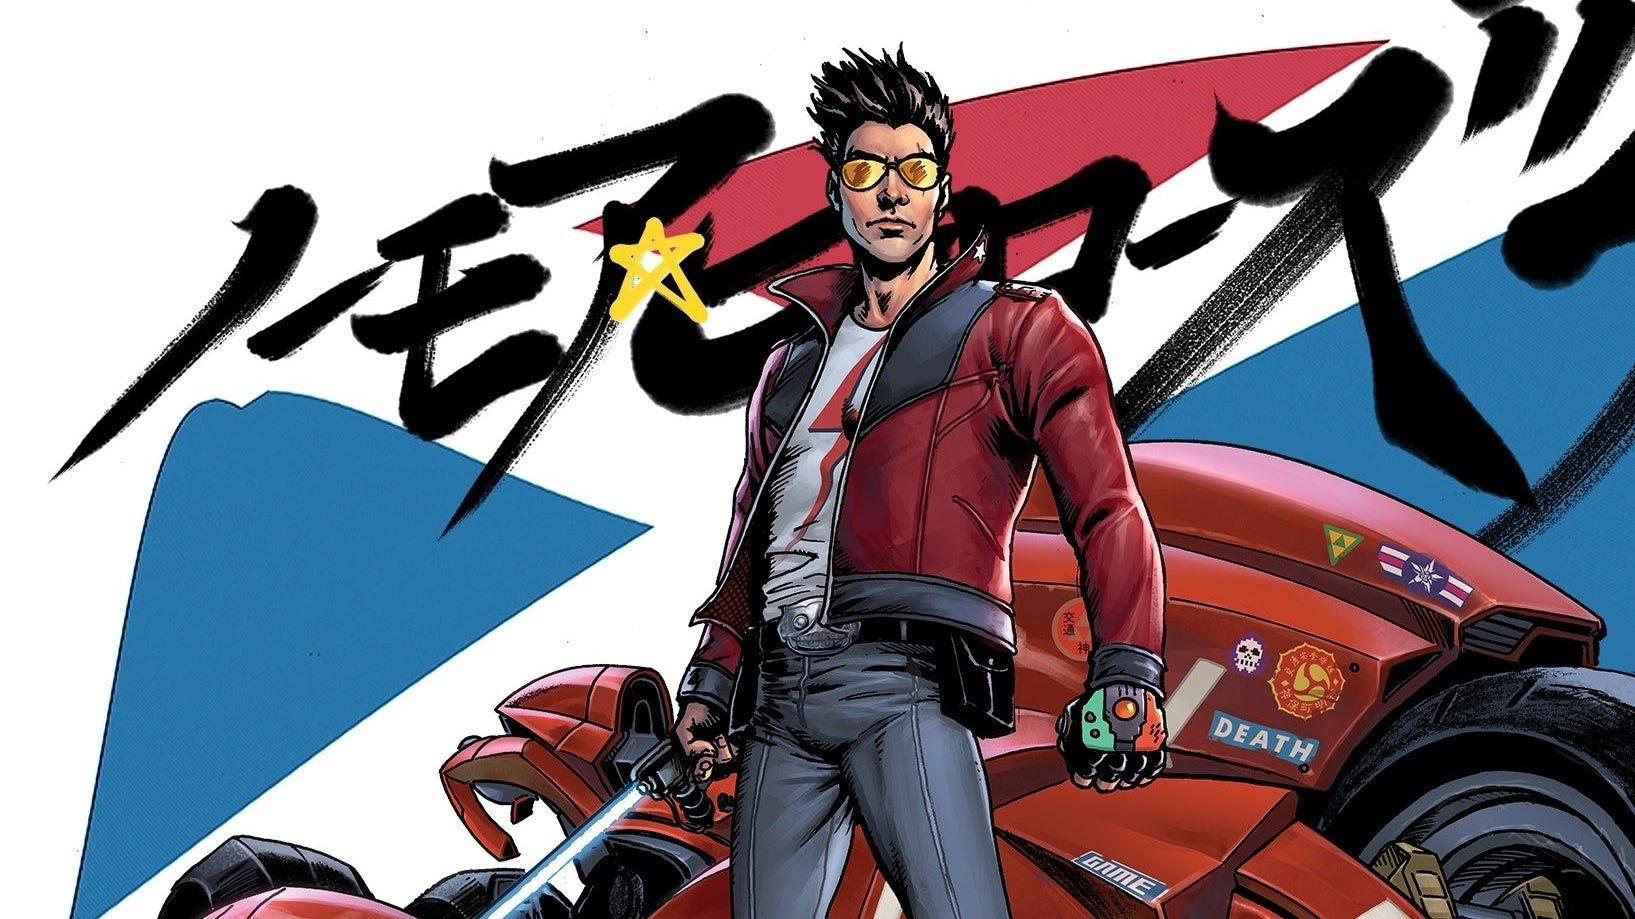 Image for No More Heroes 3 delayed until 2021